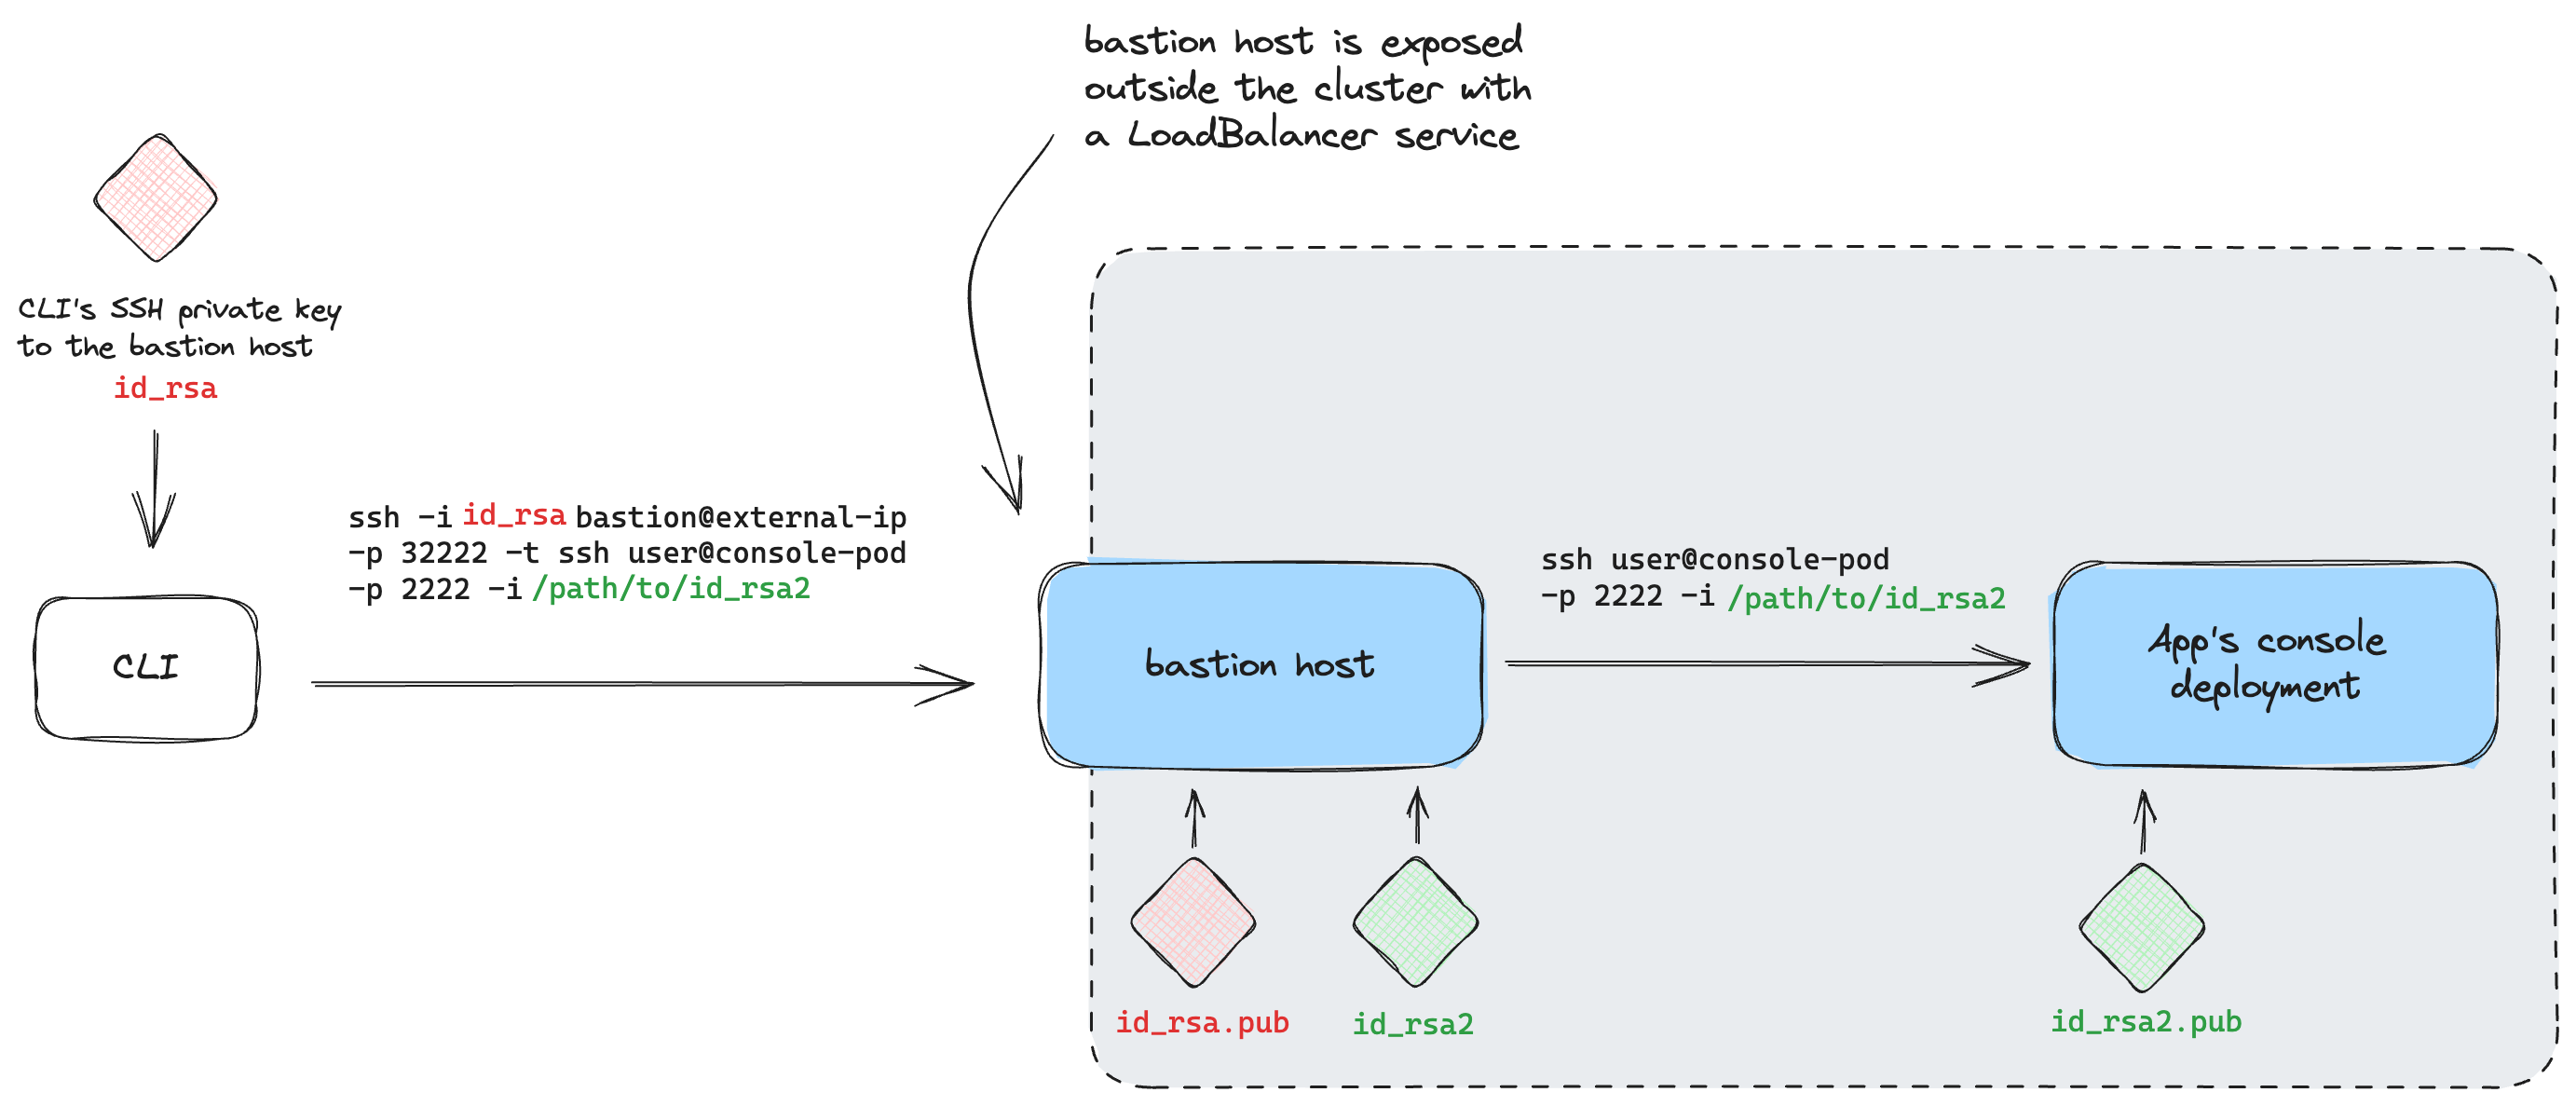 The bastion host architecture for exposing deployments